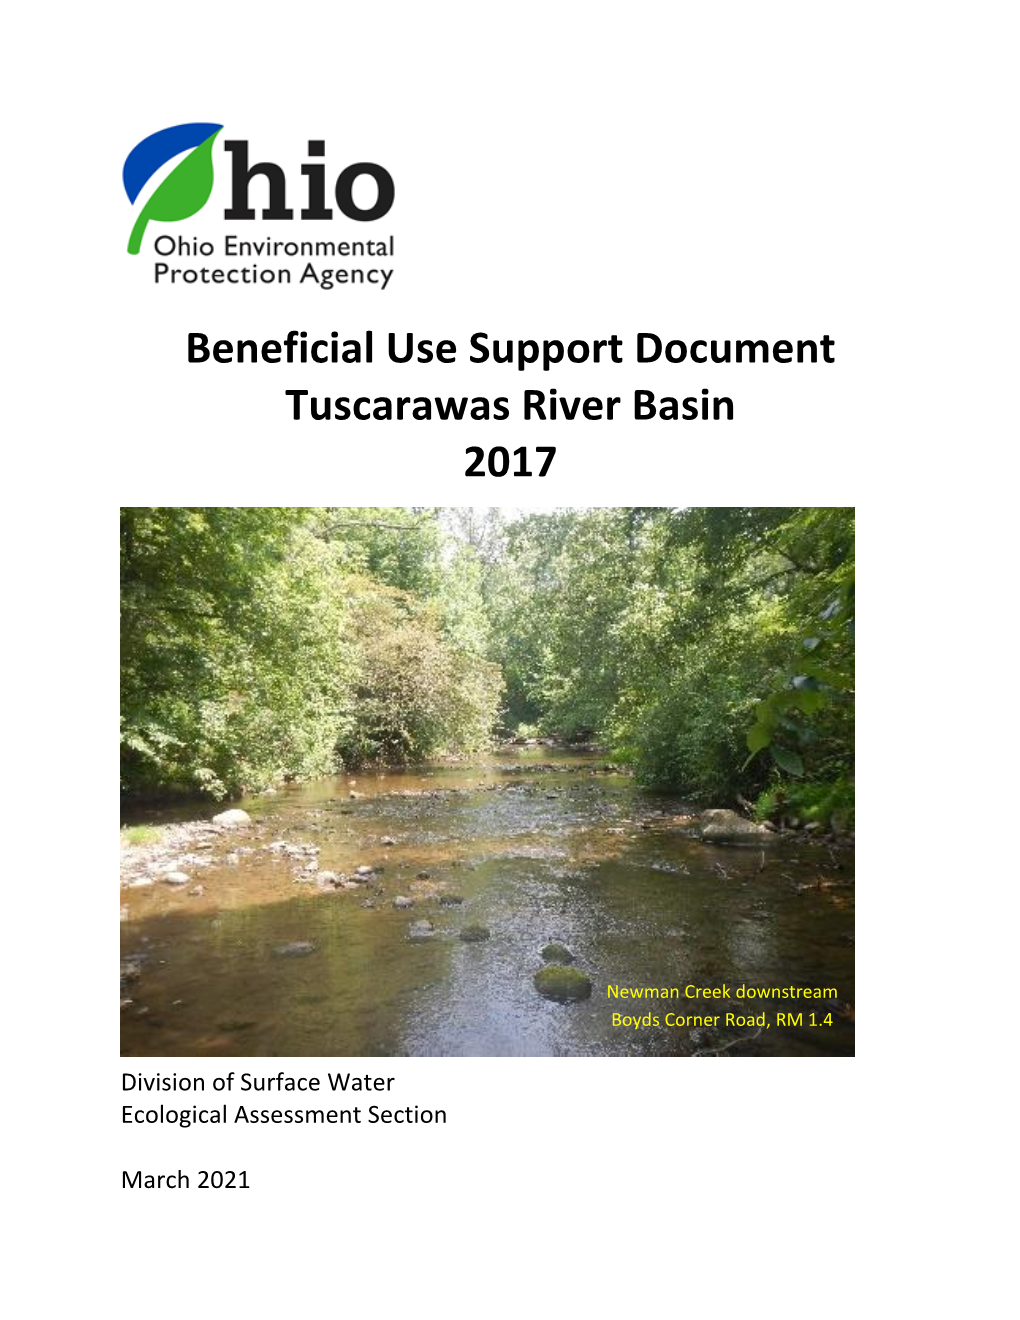 Beneficial Use Support Document Tuscarawas River Basin 2017